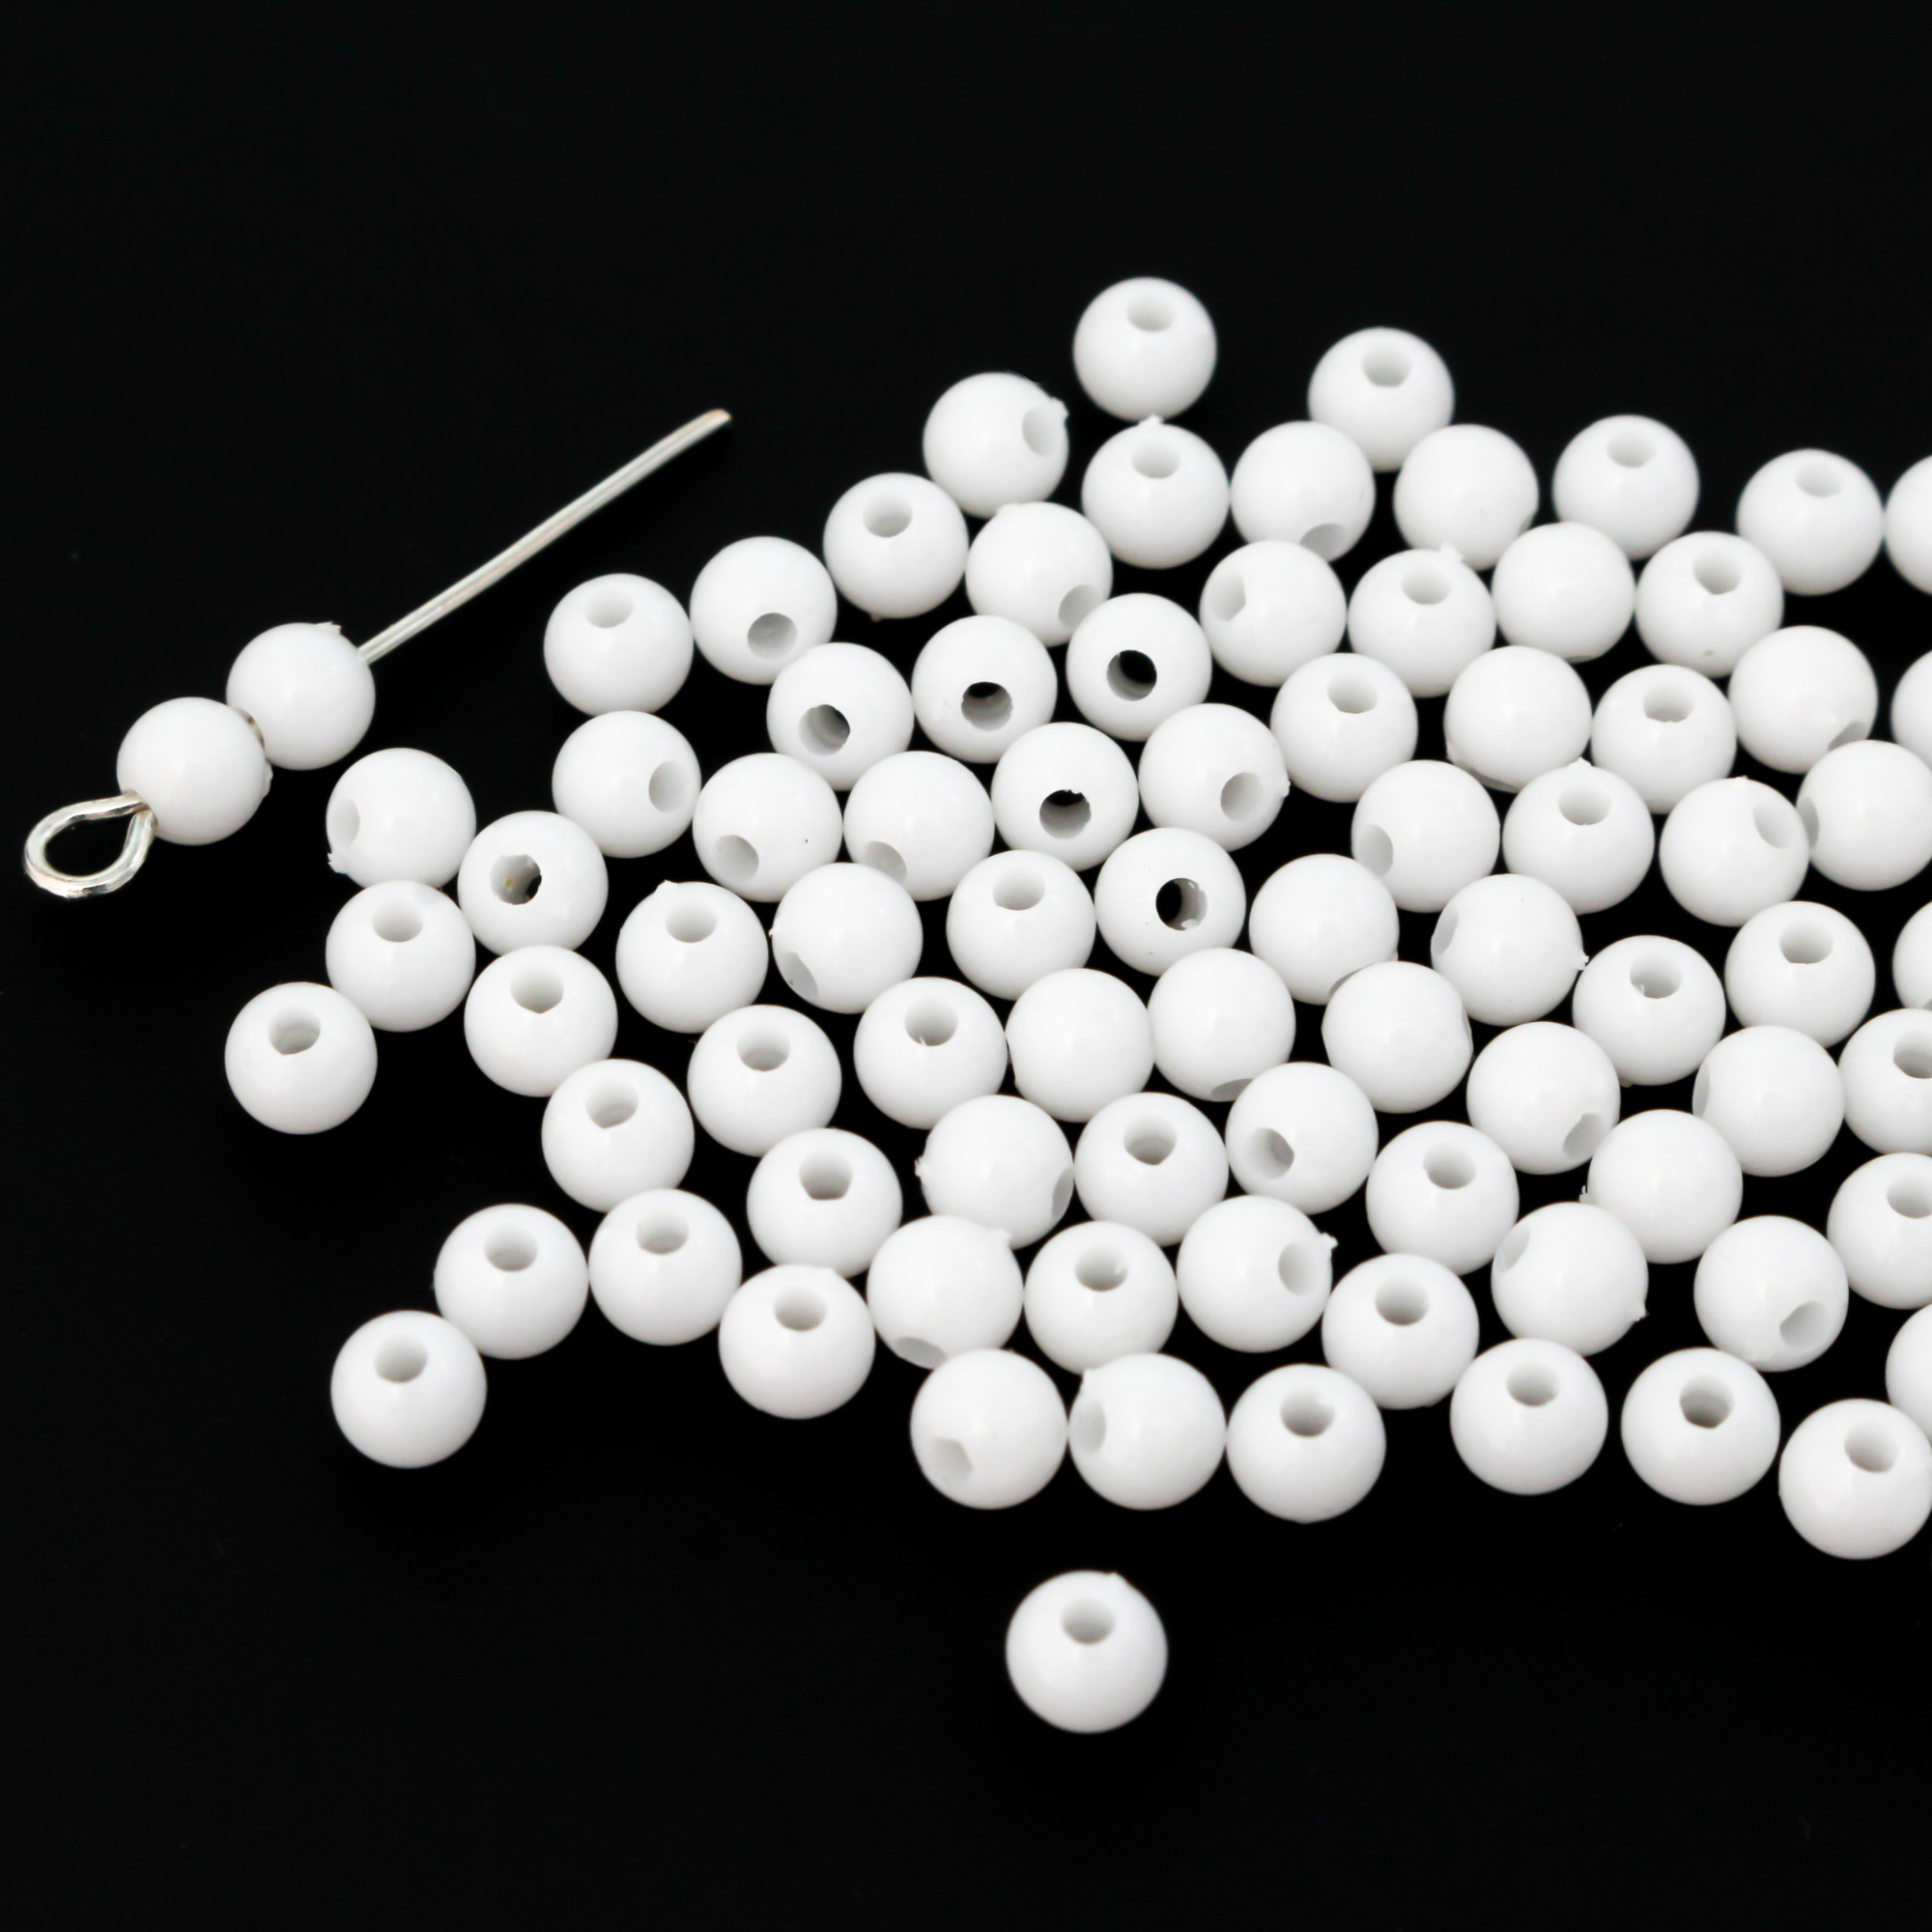 300 acrylic white opaque beads that are small and perfect for spacer beads, 4mm round